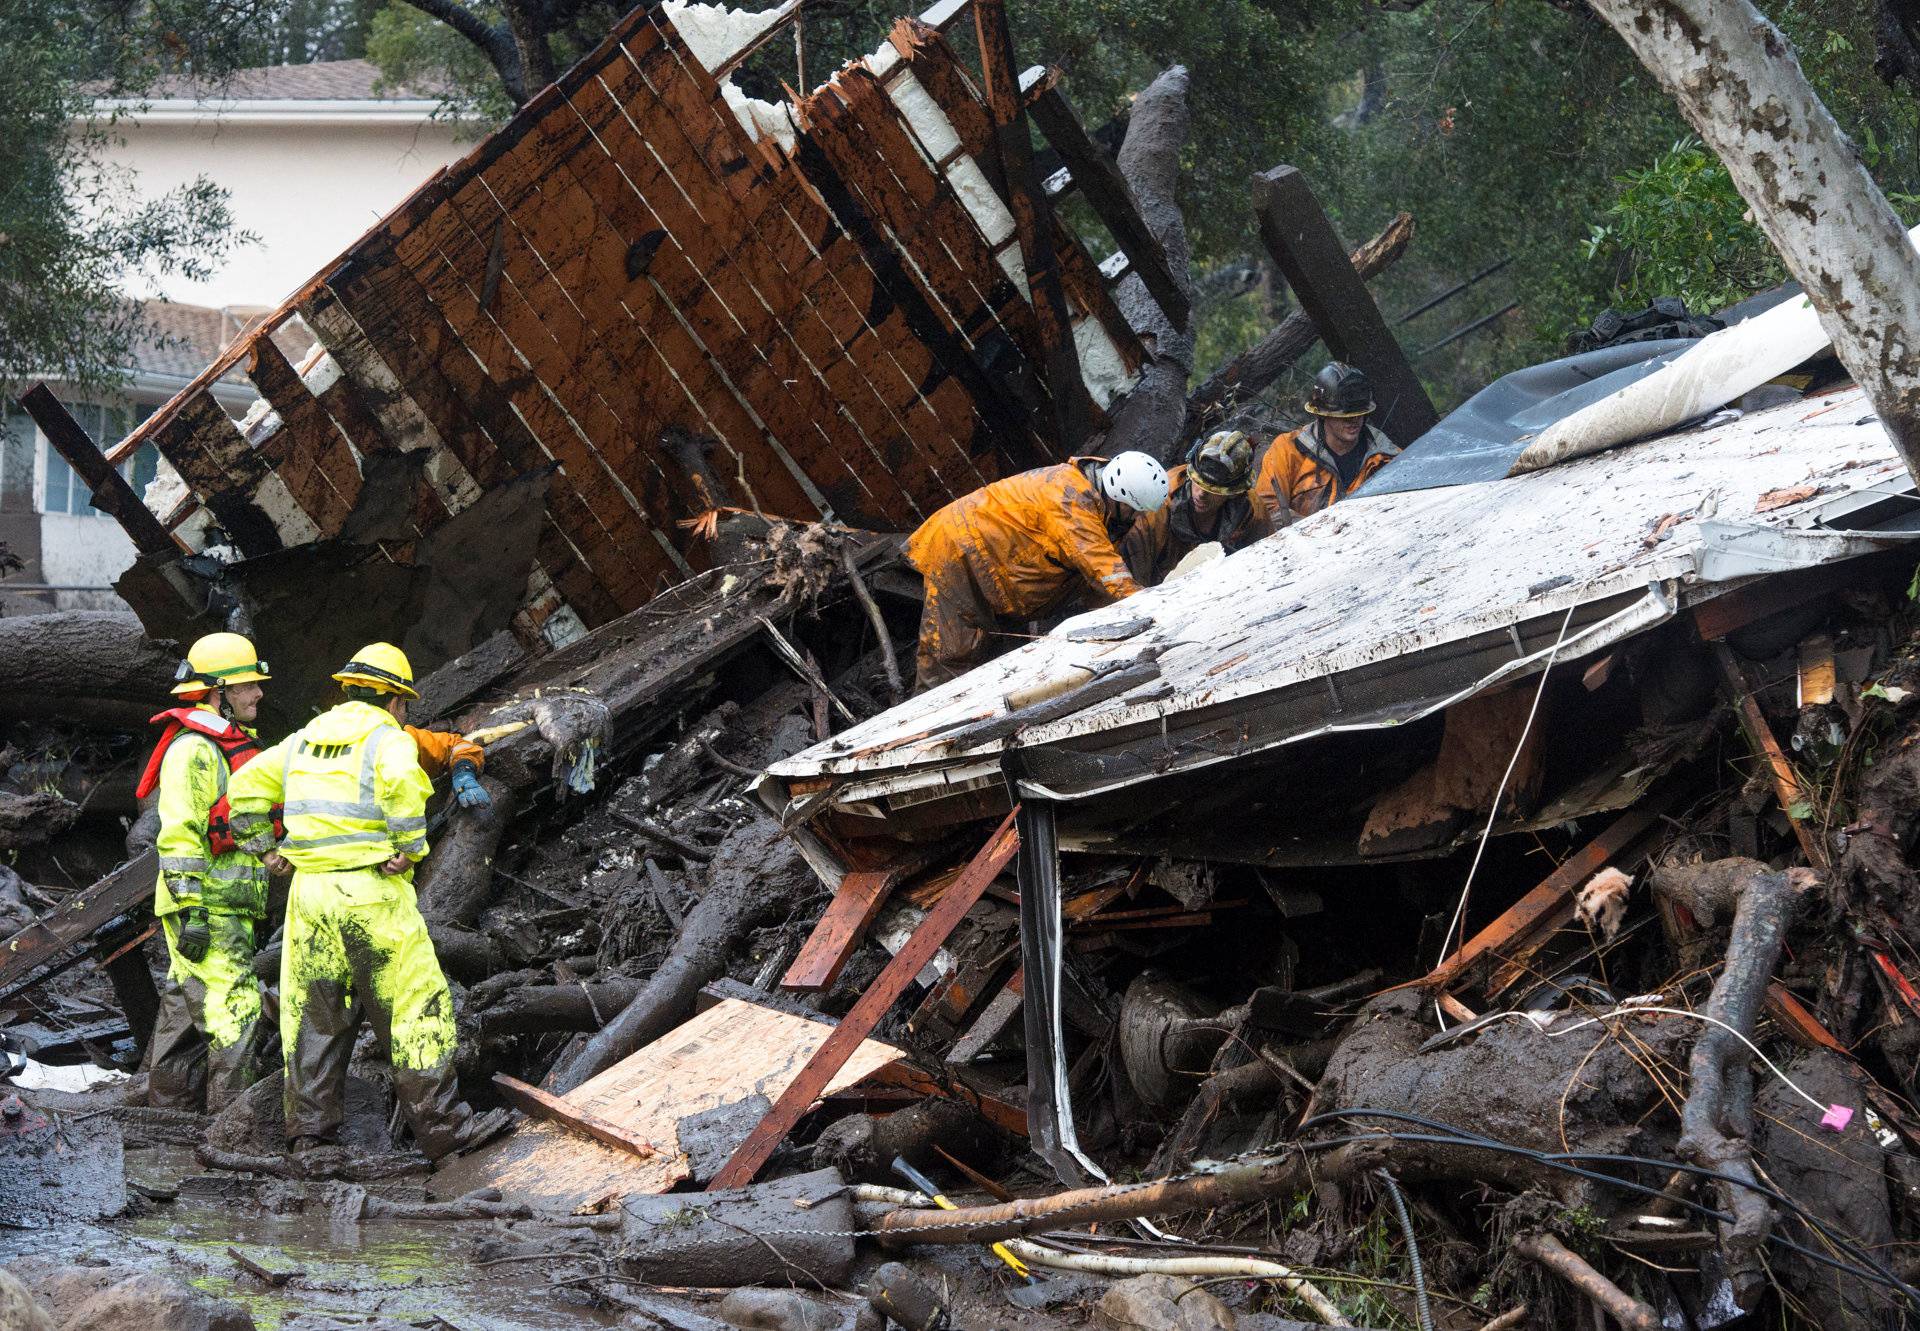 Emergency personnel prepare to rescue a trapped woman inside a collapsed house in Montecito